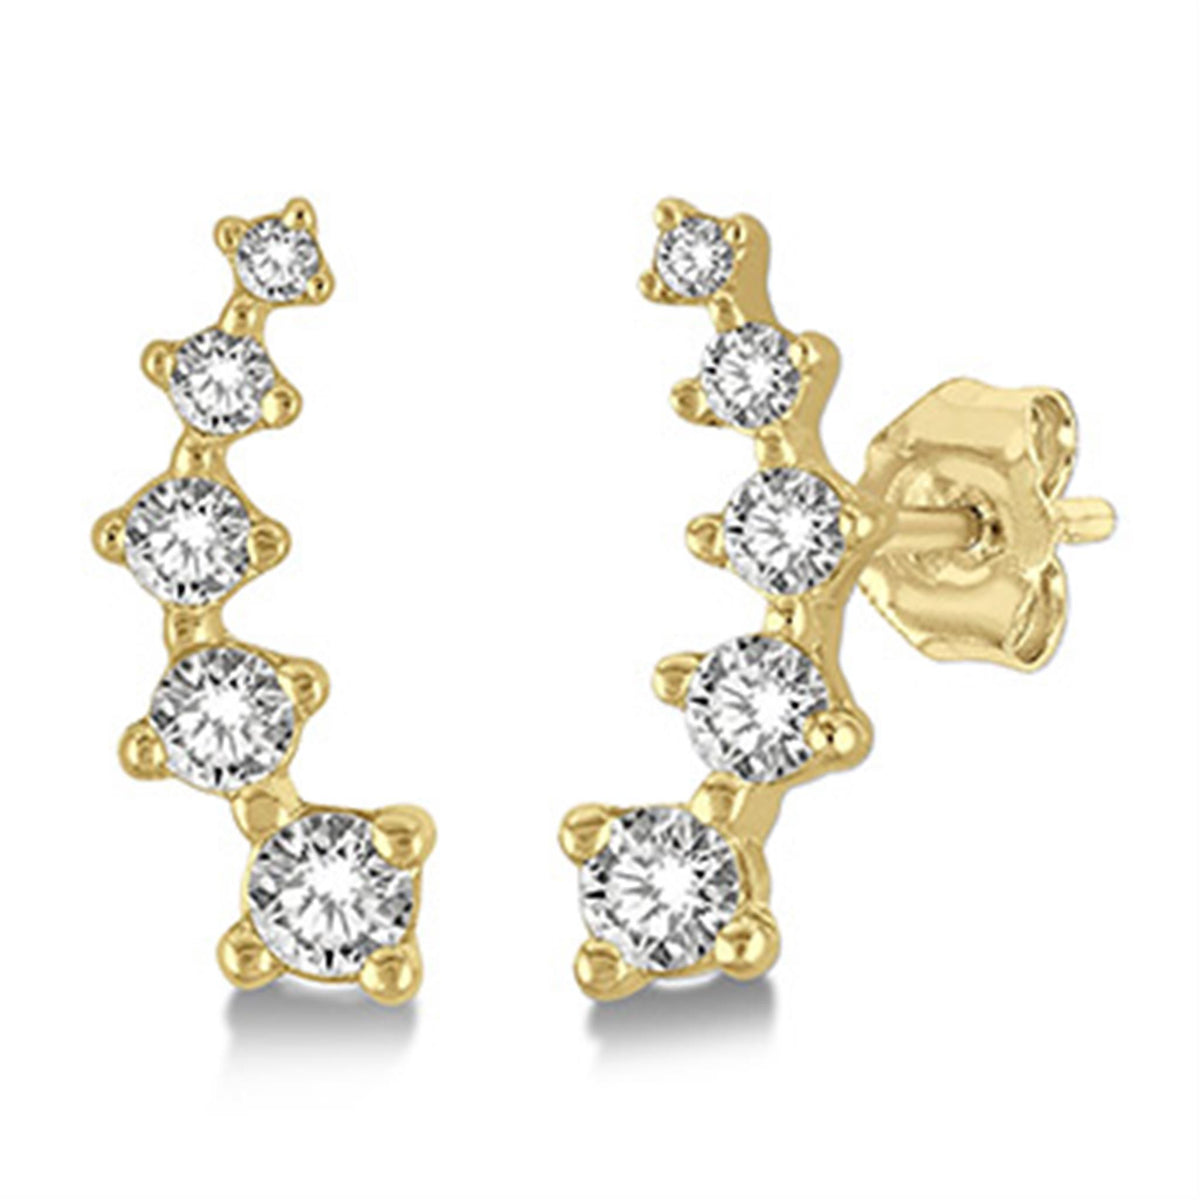 14Kt Yellow Gold Climber Stud Earrings with 0.25cttw Natural Diamonds